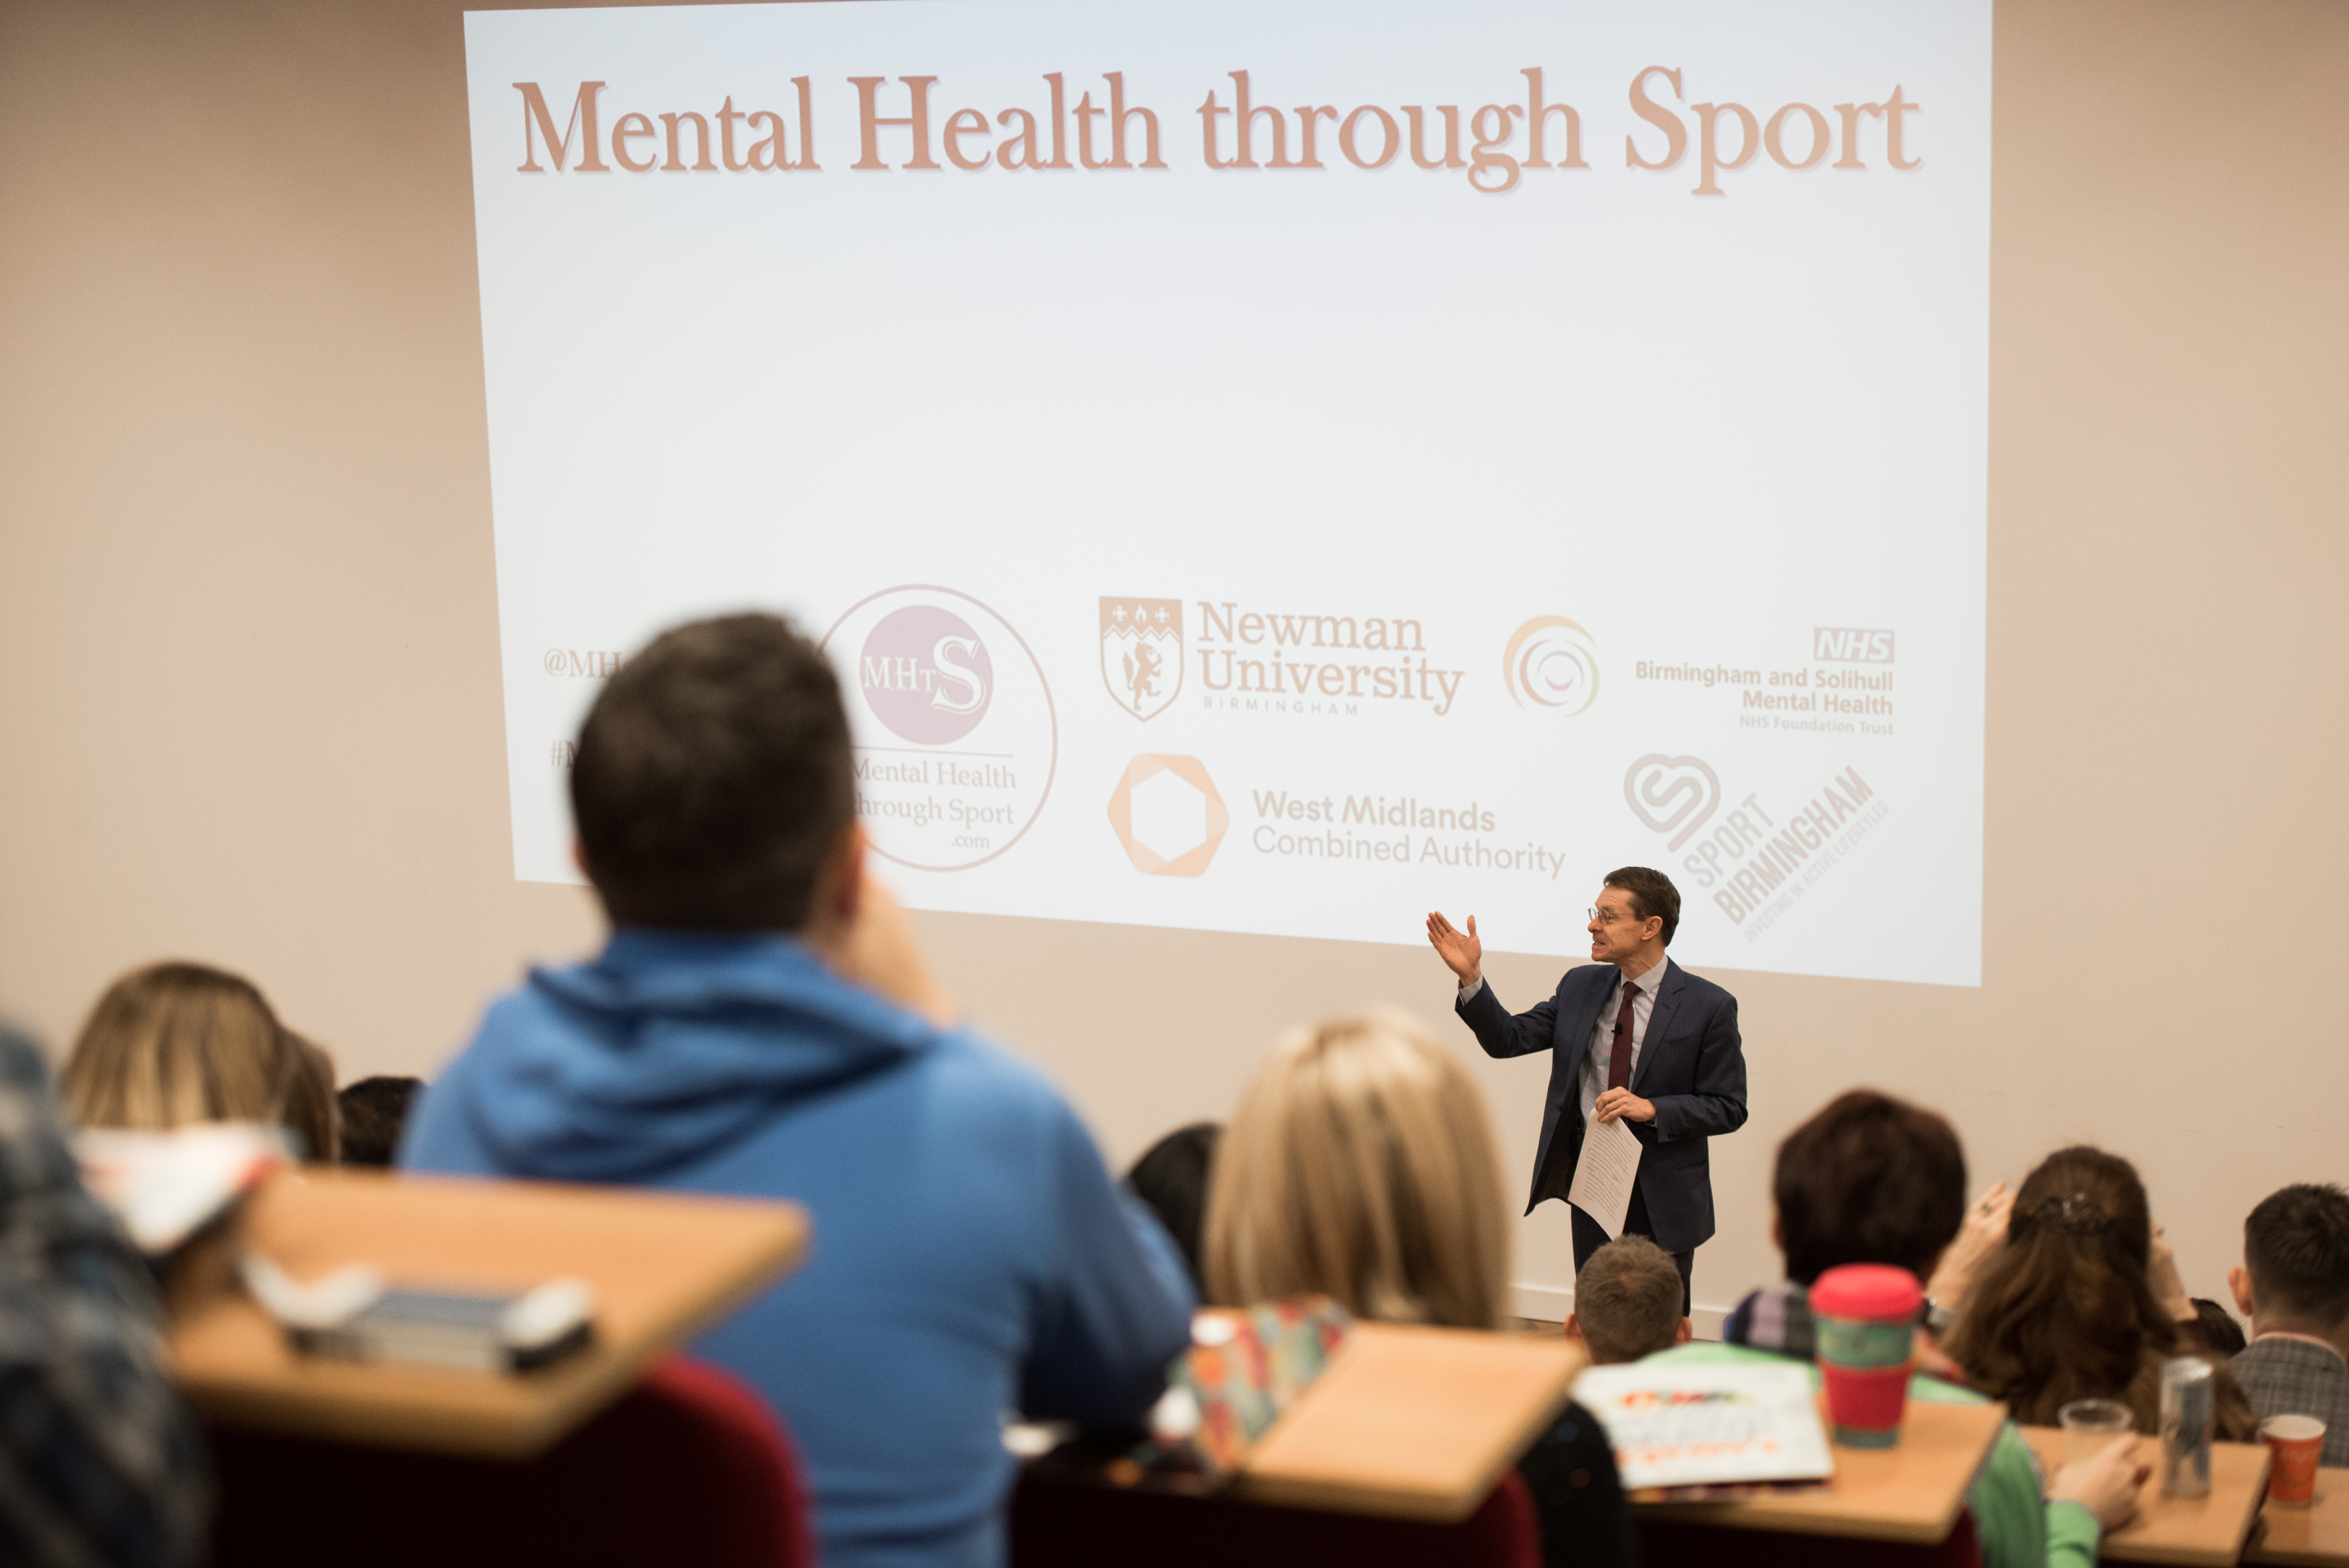 Andy Street opened the Mental Health through Sport symposium